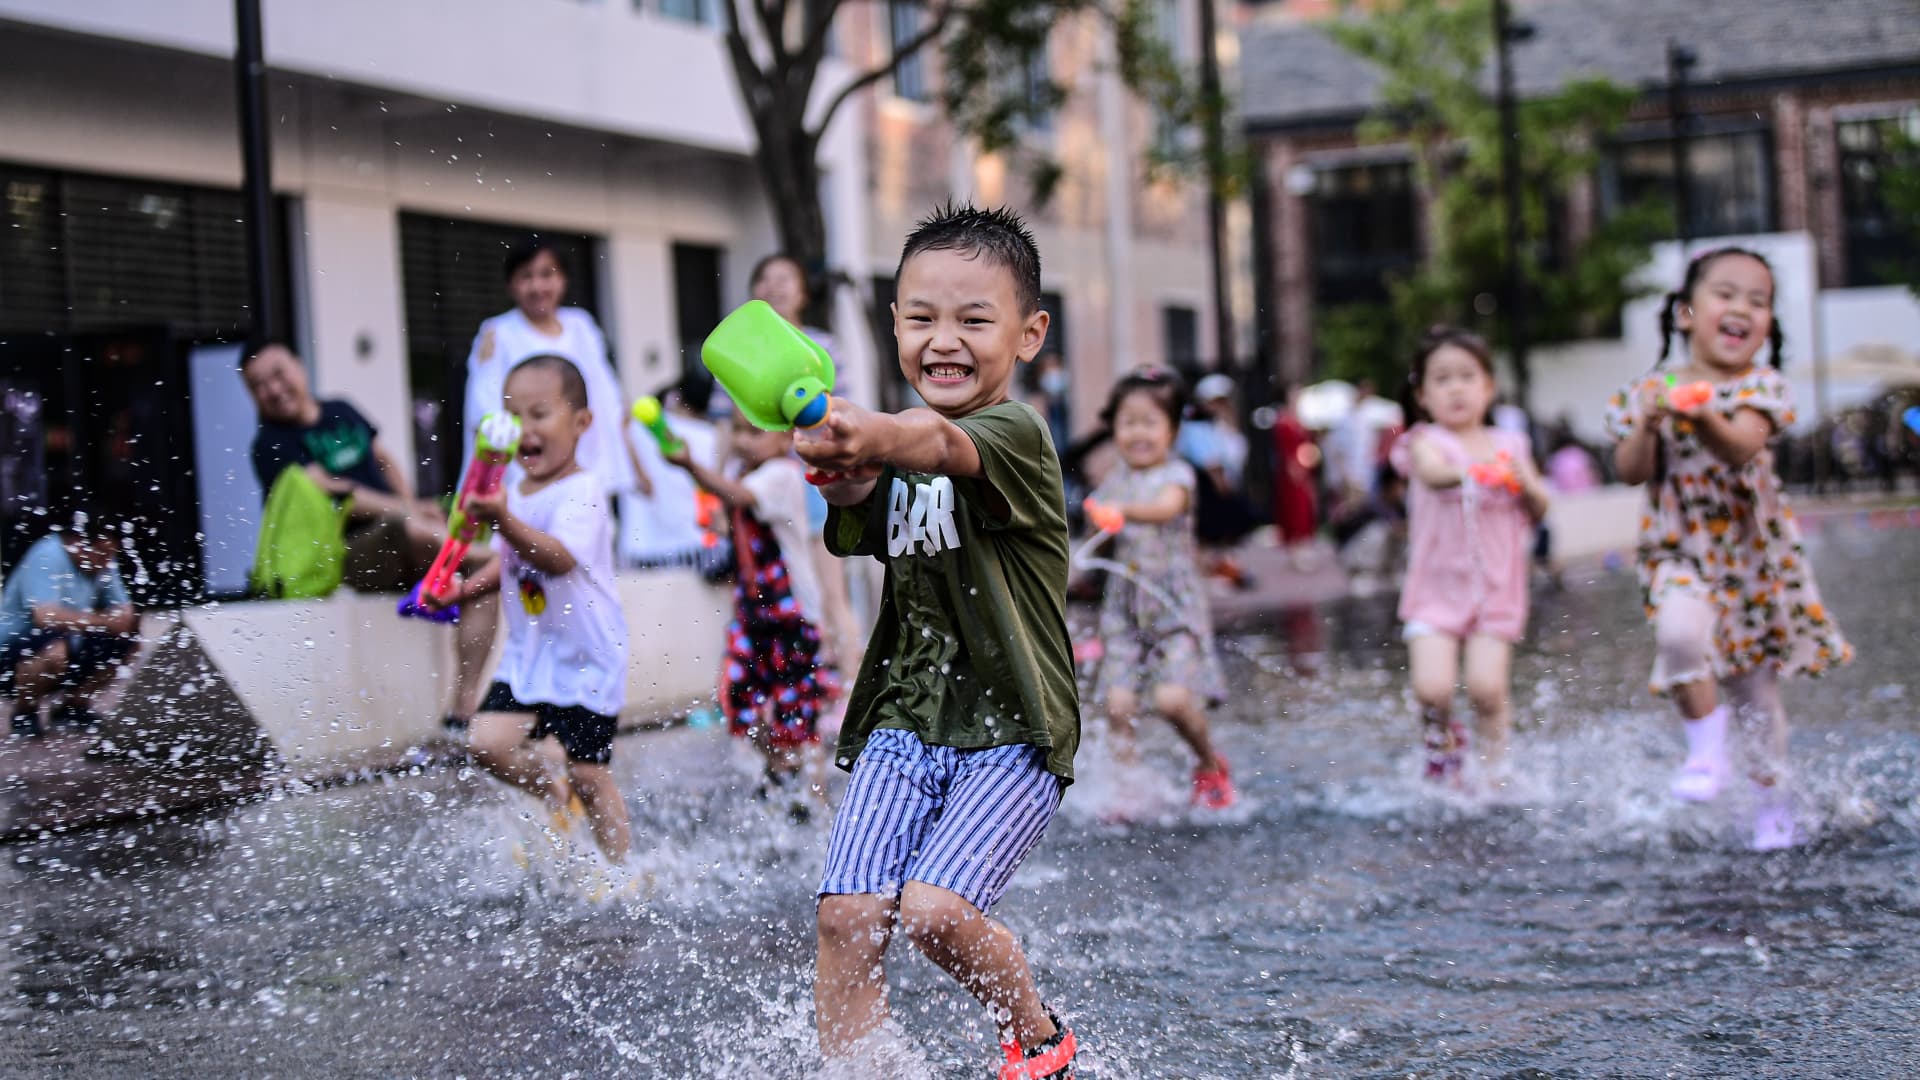 Children cool off in the water at a park as a heat wave hits the city on July 16, 2021 in Shenyang, Liaoning Province of China.